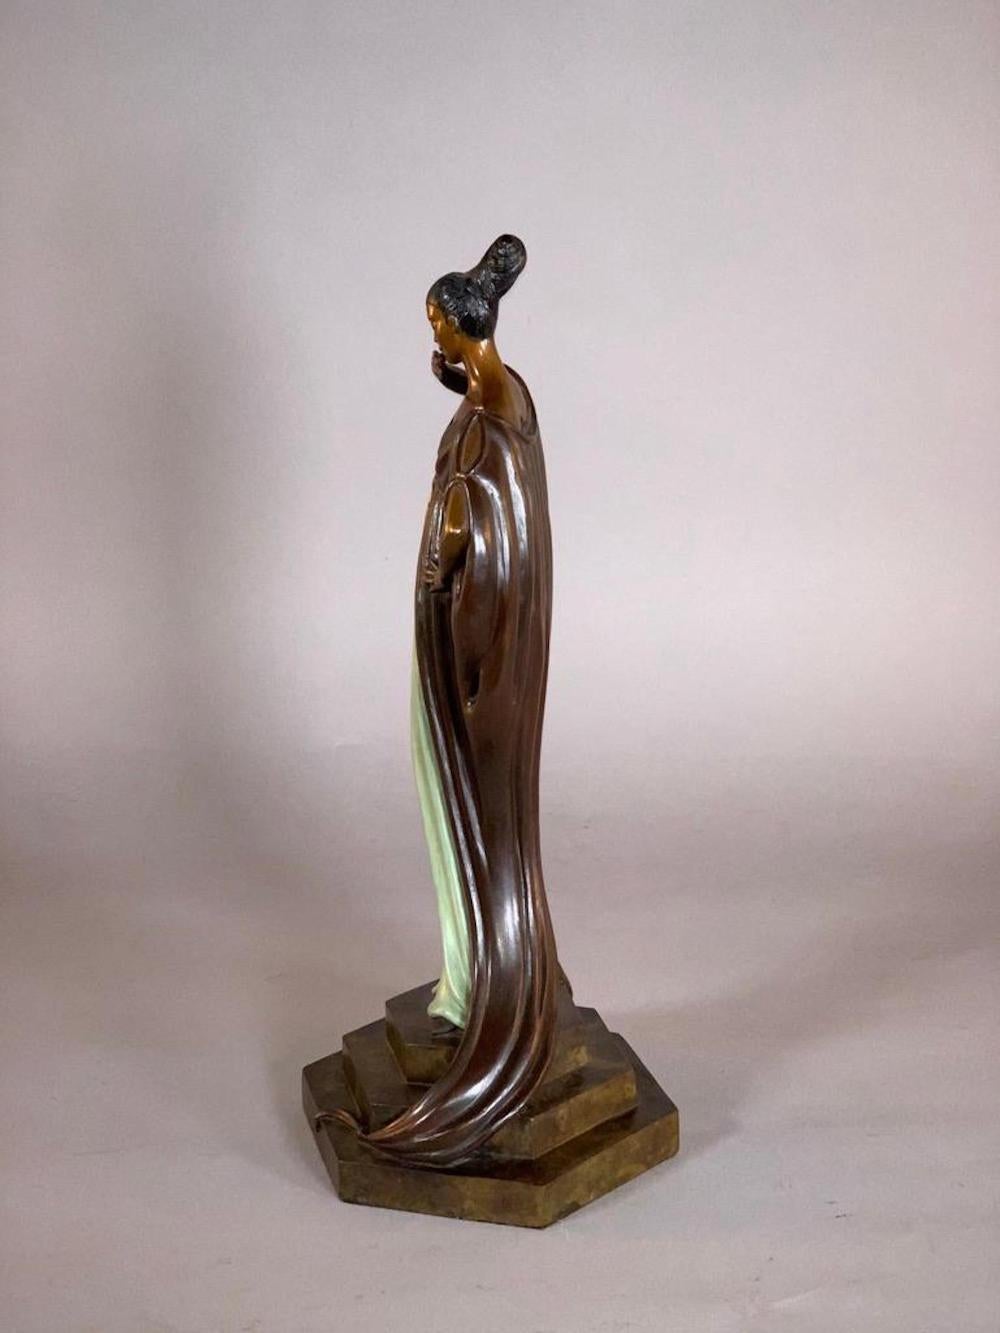 Artist: Erte, Romain de Tirtoff (1892-1990)
Title: An Evening in 1922
Year: 1982
Medium: Bronze
Edition: 61/250 Numbered, 12 AP, 9 HC
Size: 17 inches
Condition: Excellent
Inscription: Incised with the artist's signature & edition number.

ERTE